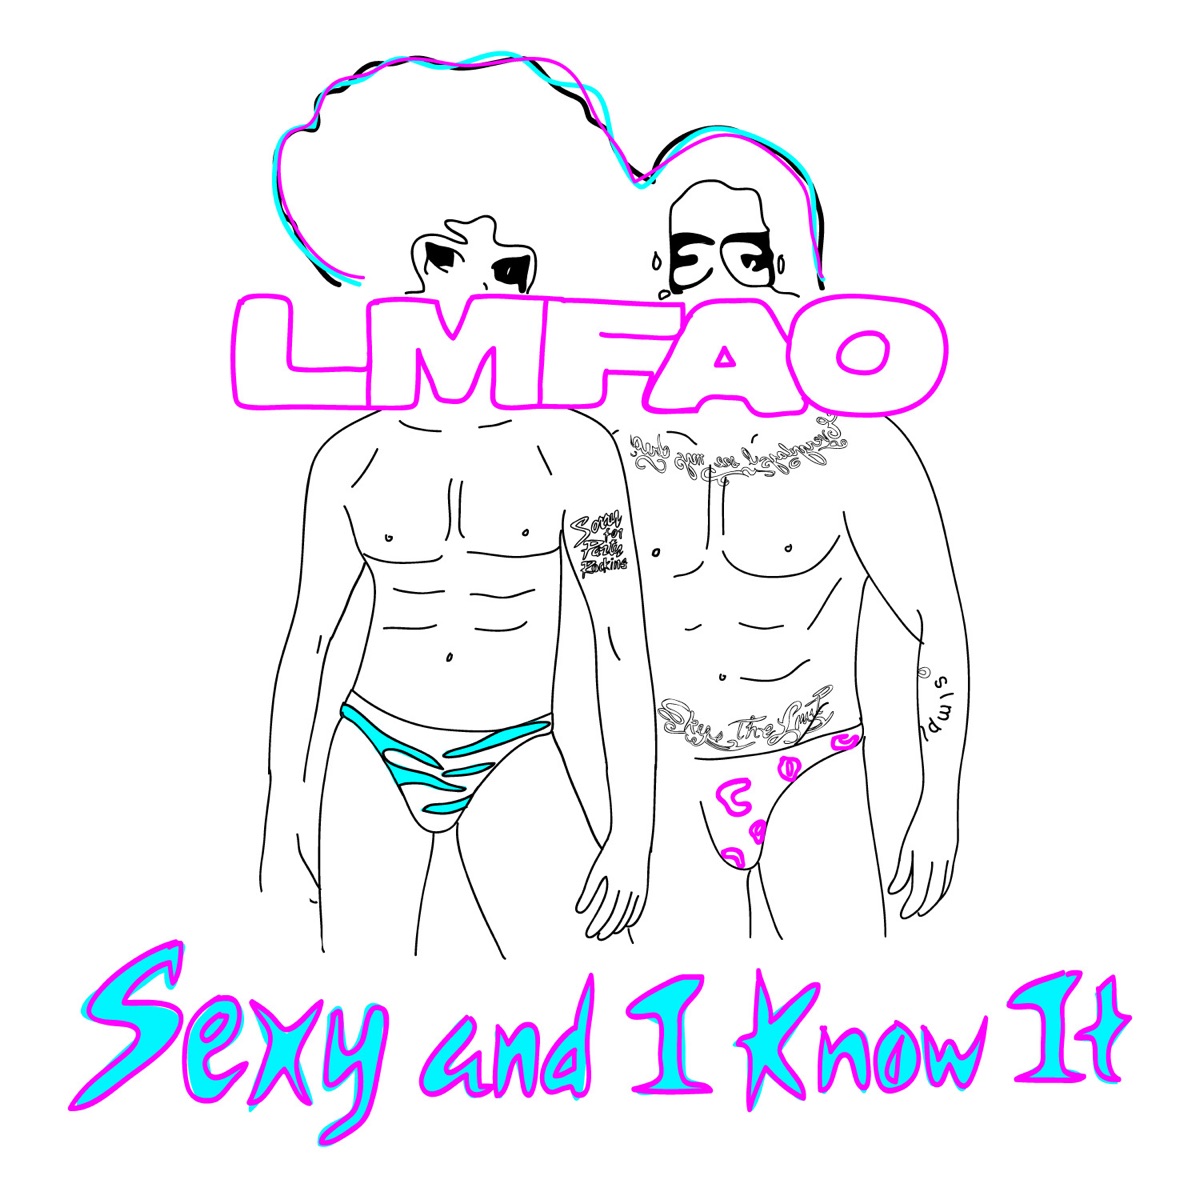 LMFAO Sexy and I Know It cover artwork